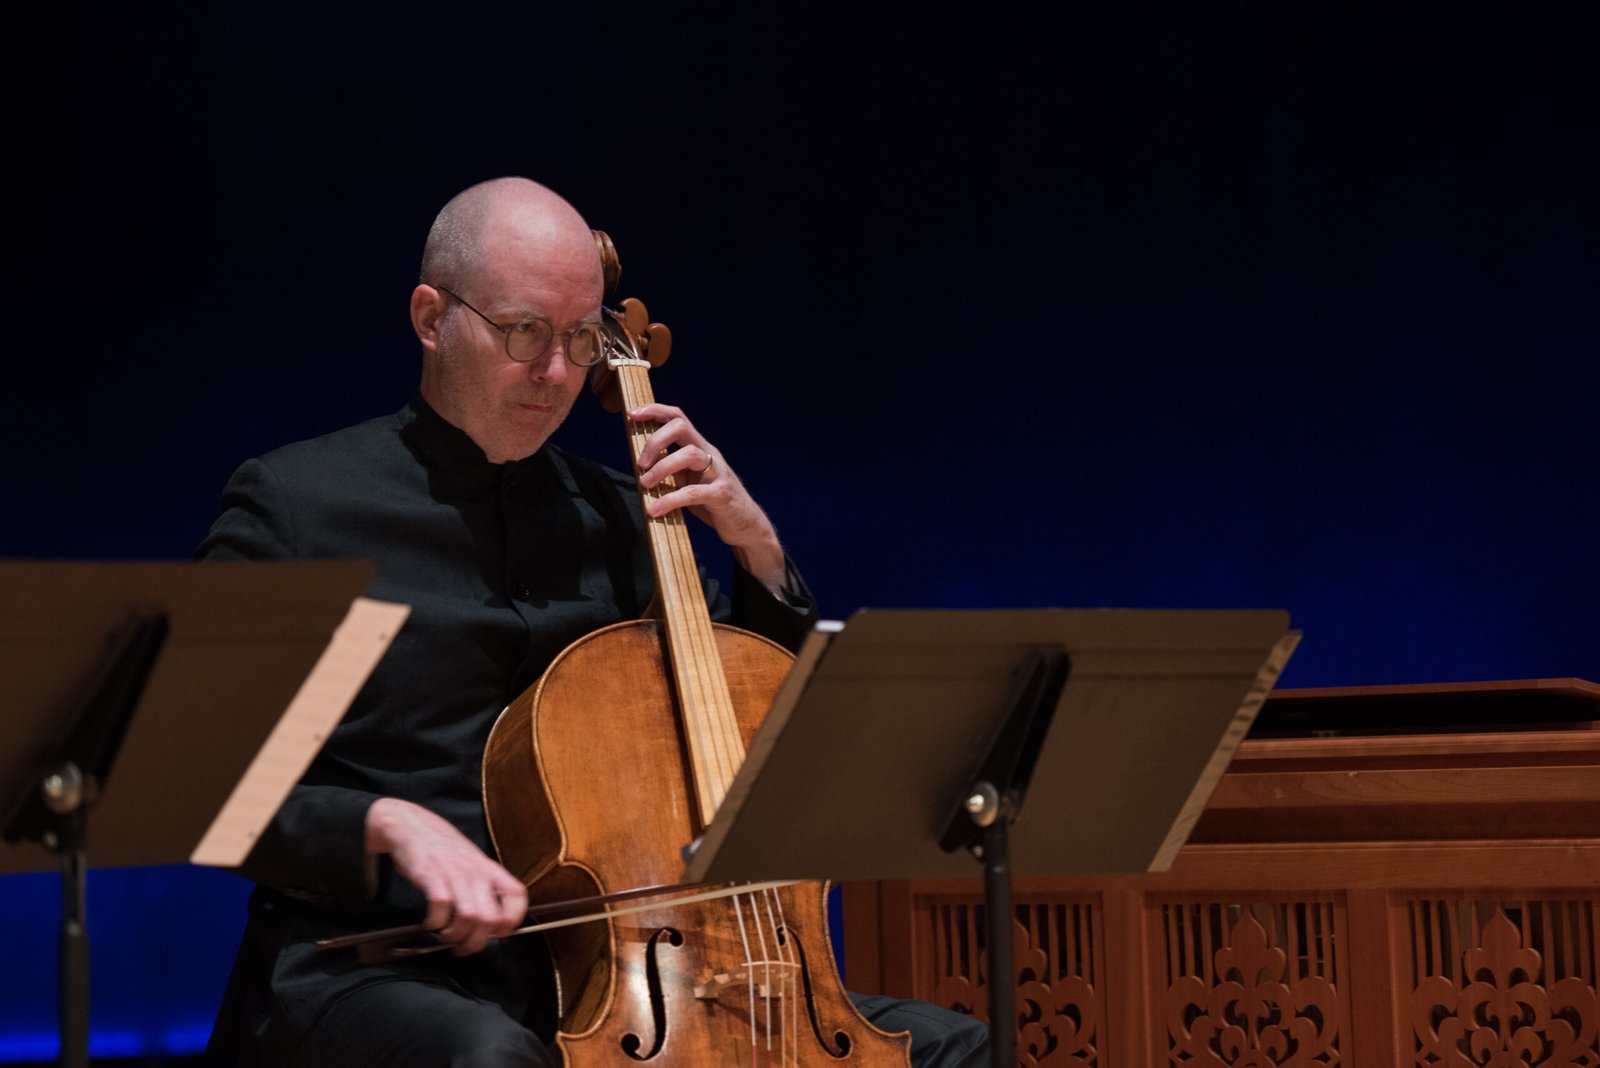 Founder and artistic director of Haymarket Opera Company, Craig Trompeter, leads by an example of excellence, here playing cello for the religious oratorio, La Susanna, by Alessandro Stradella. Photo by Topher Alexander. 2022